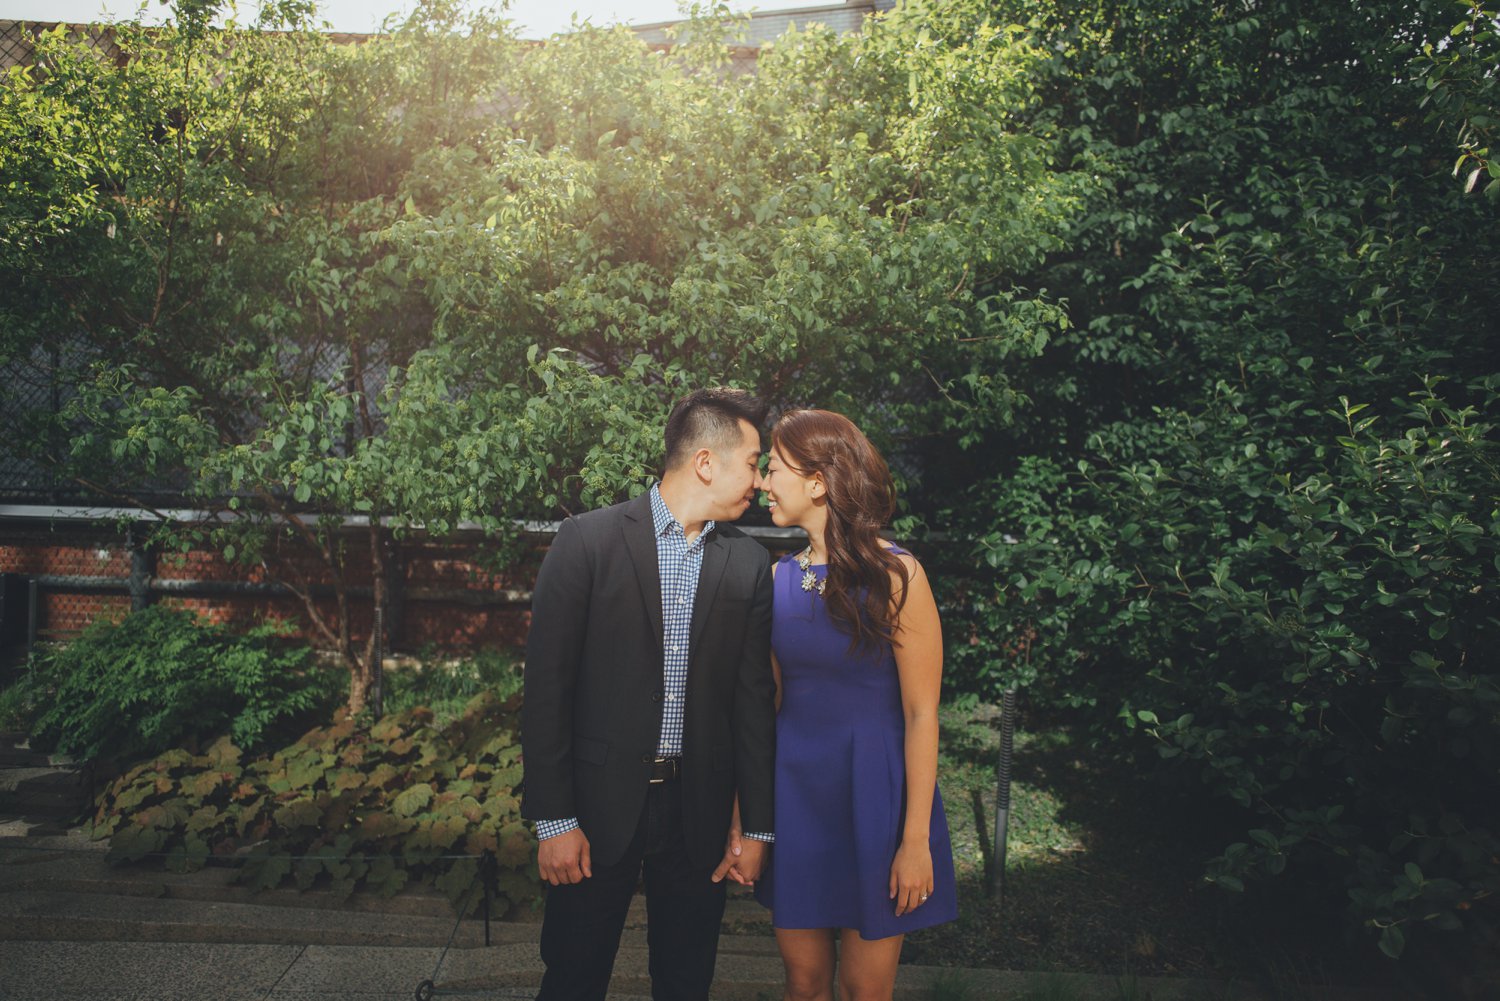 8NYC-NJ-ENGAGEMENT-PHOTOGRAPHY-BY-INTOTHESTORY-MOO-JAE.JPG